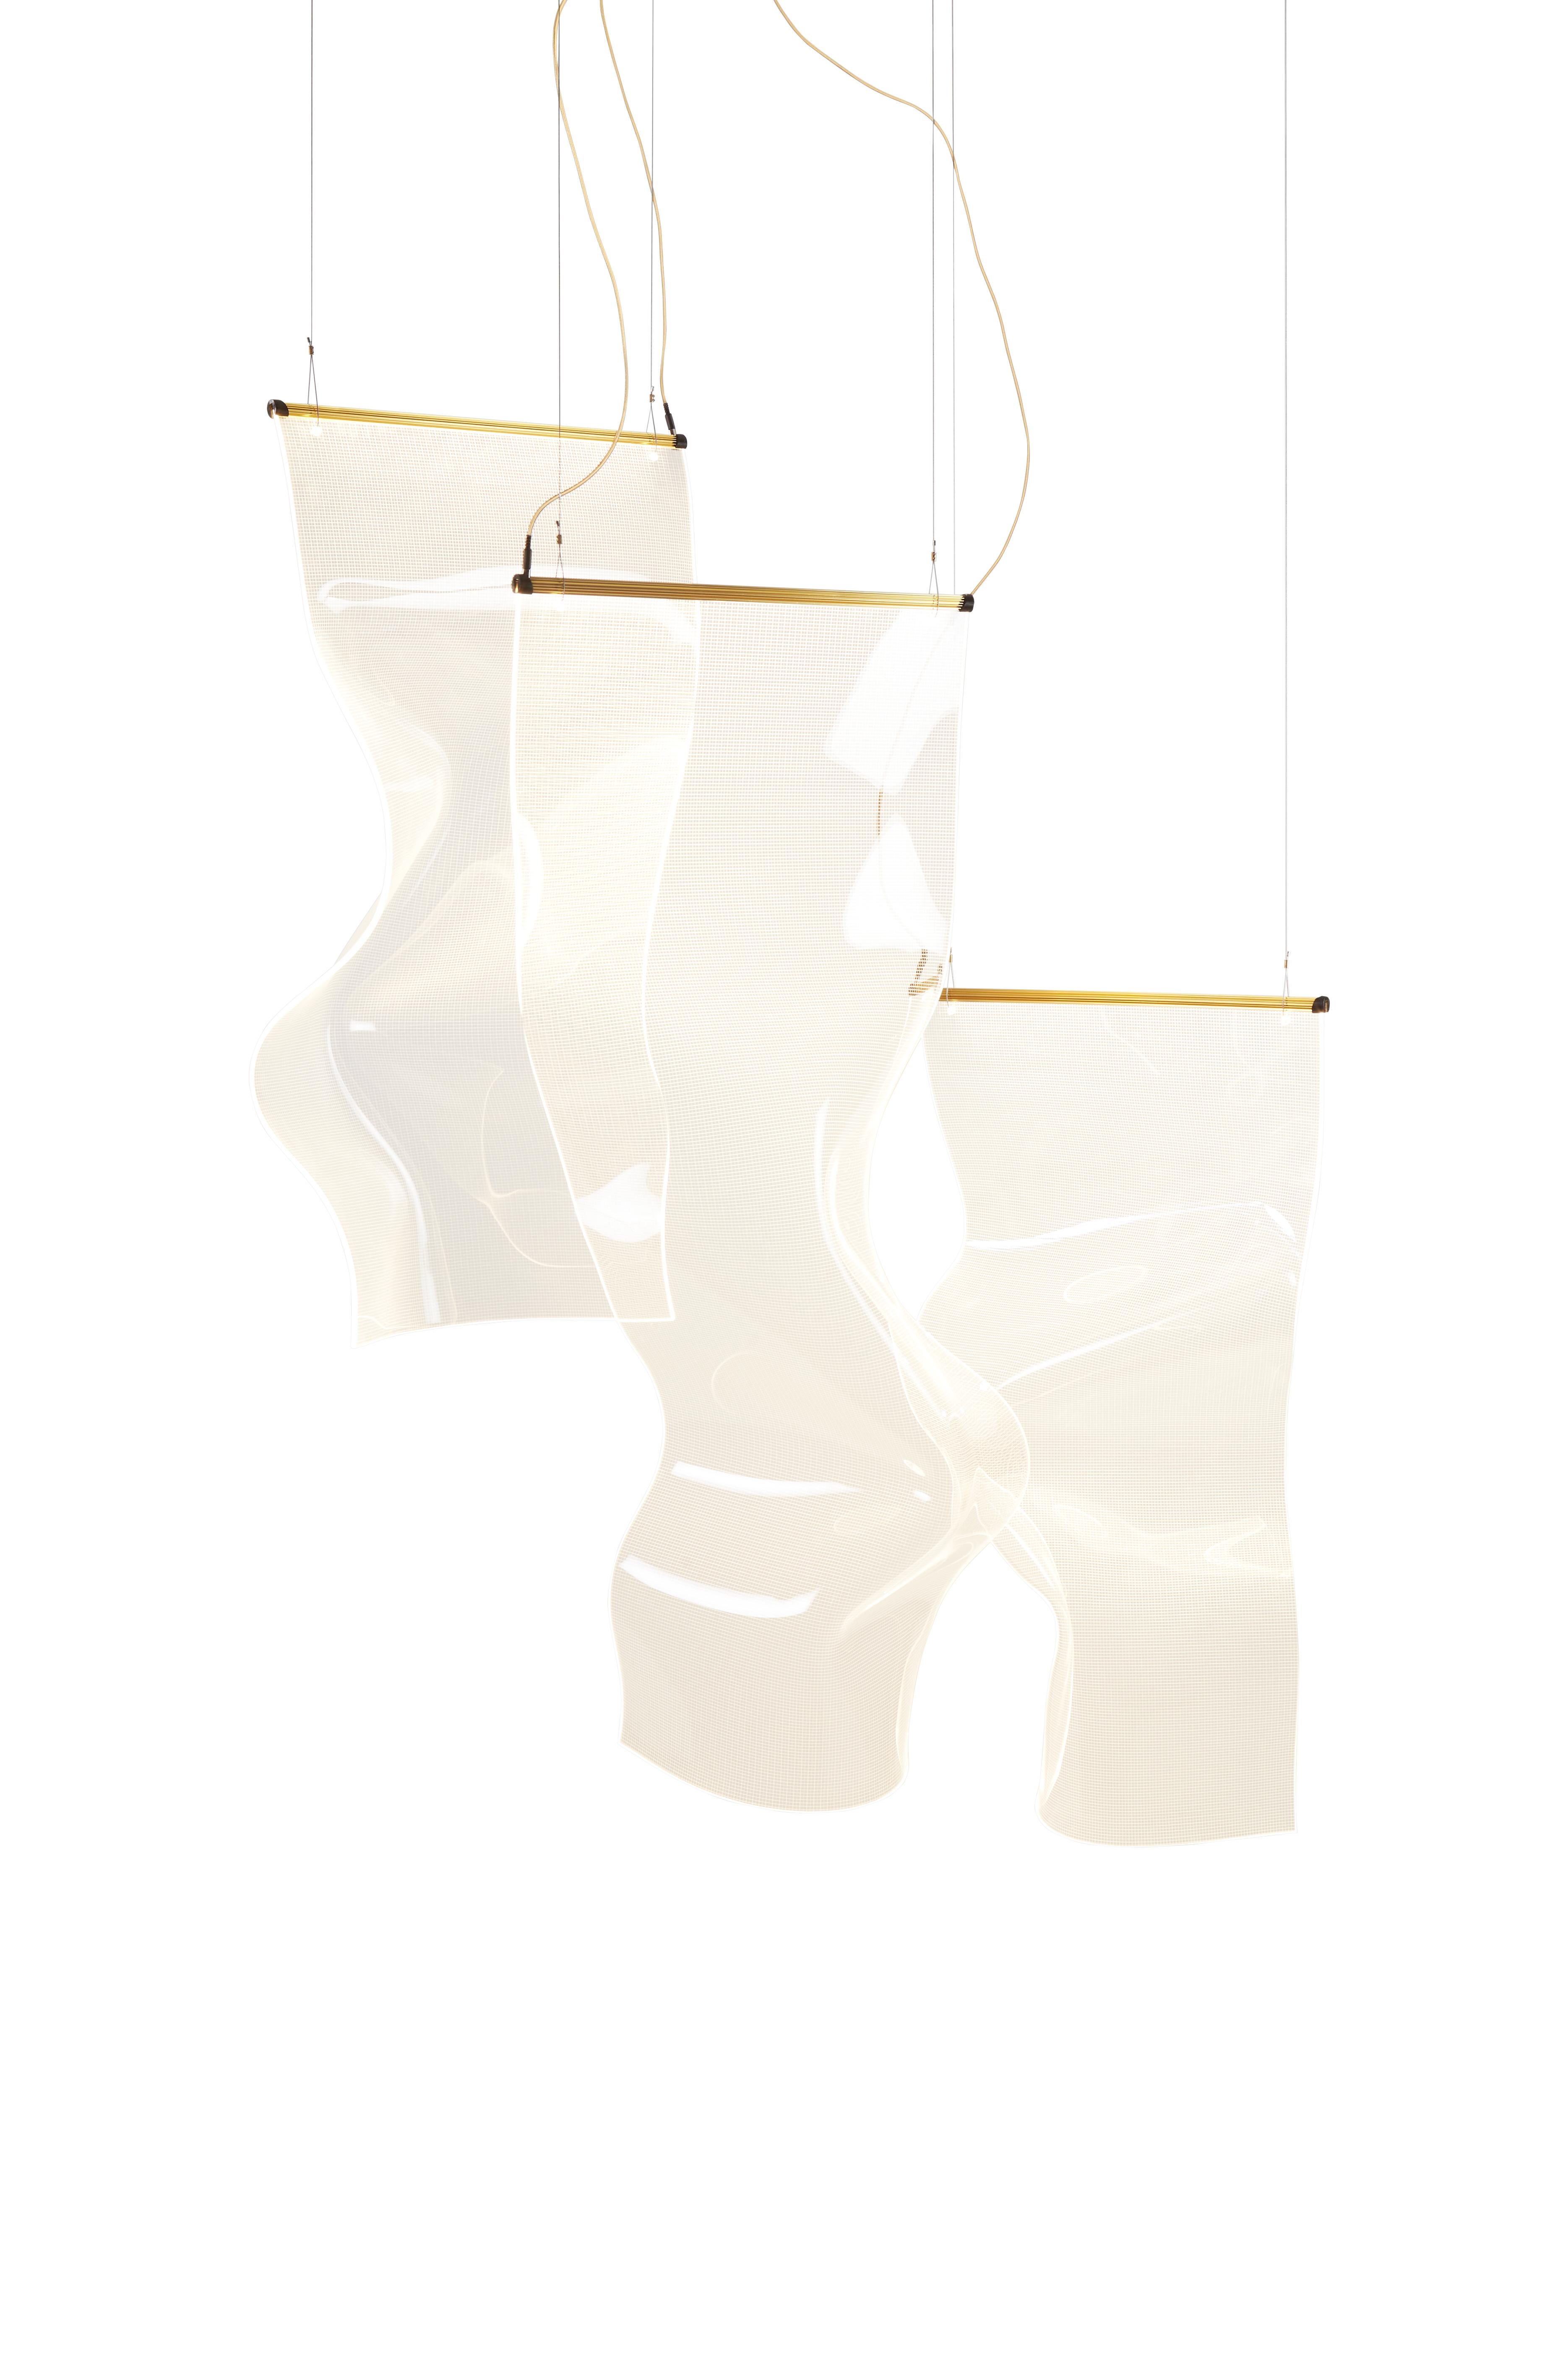 Gweilo Zhou H by Partisans


It’s name means ghost in chinese. Makes sense when you look at it, right? Made from hand-molded acrylic.
Suspension lamp. Hand-moulded, transparent acrylic structure. Led strip embedded in the gold or silver anodised